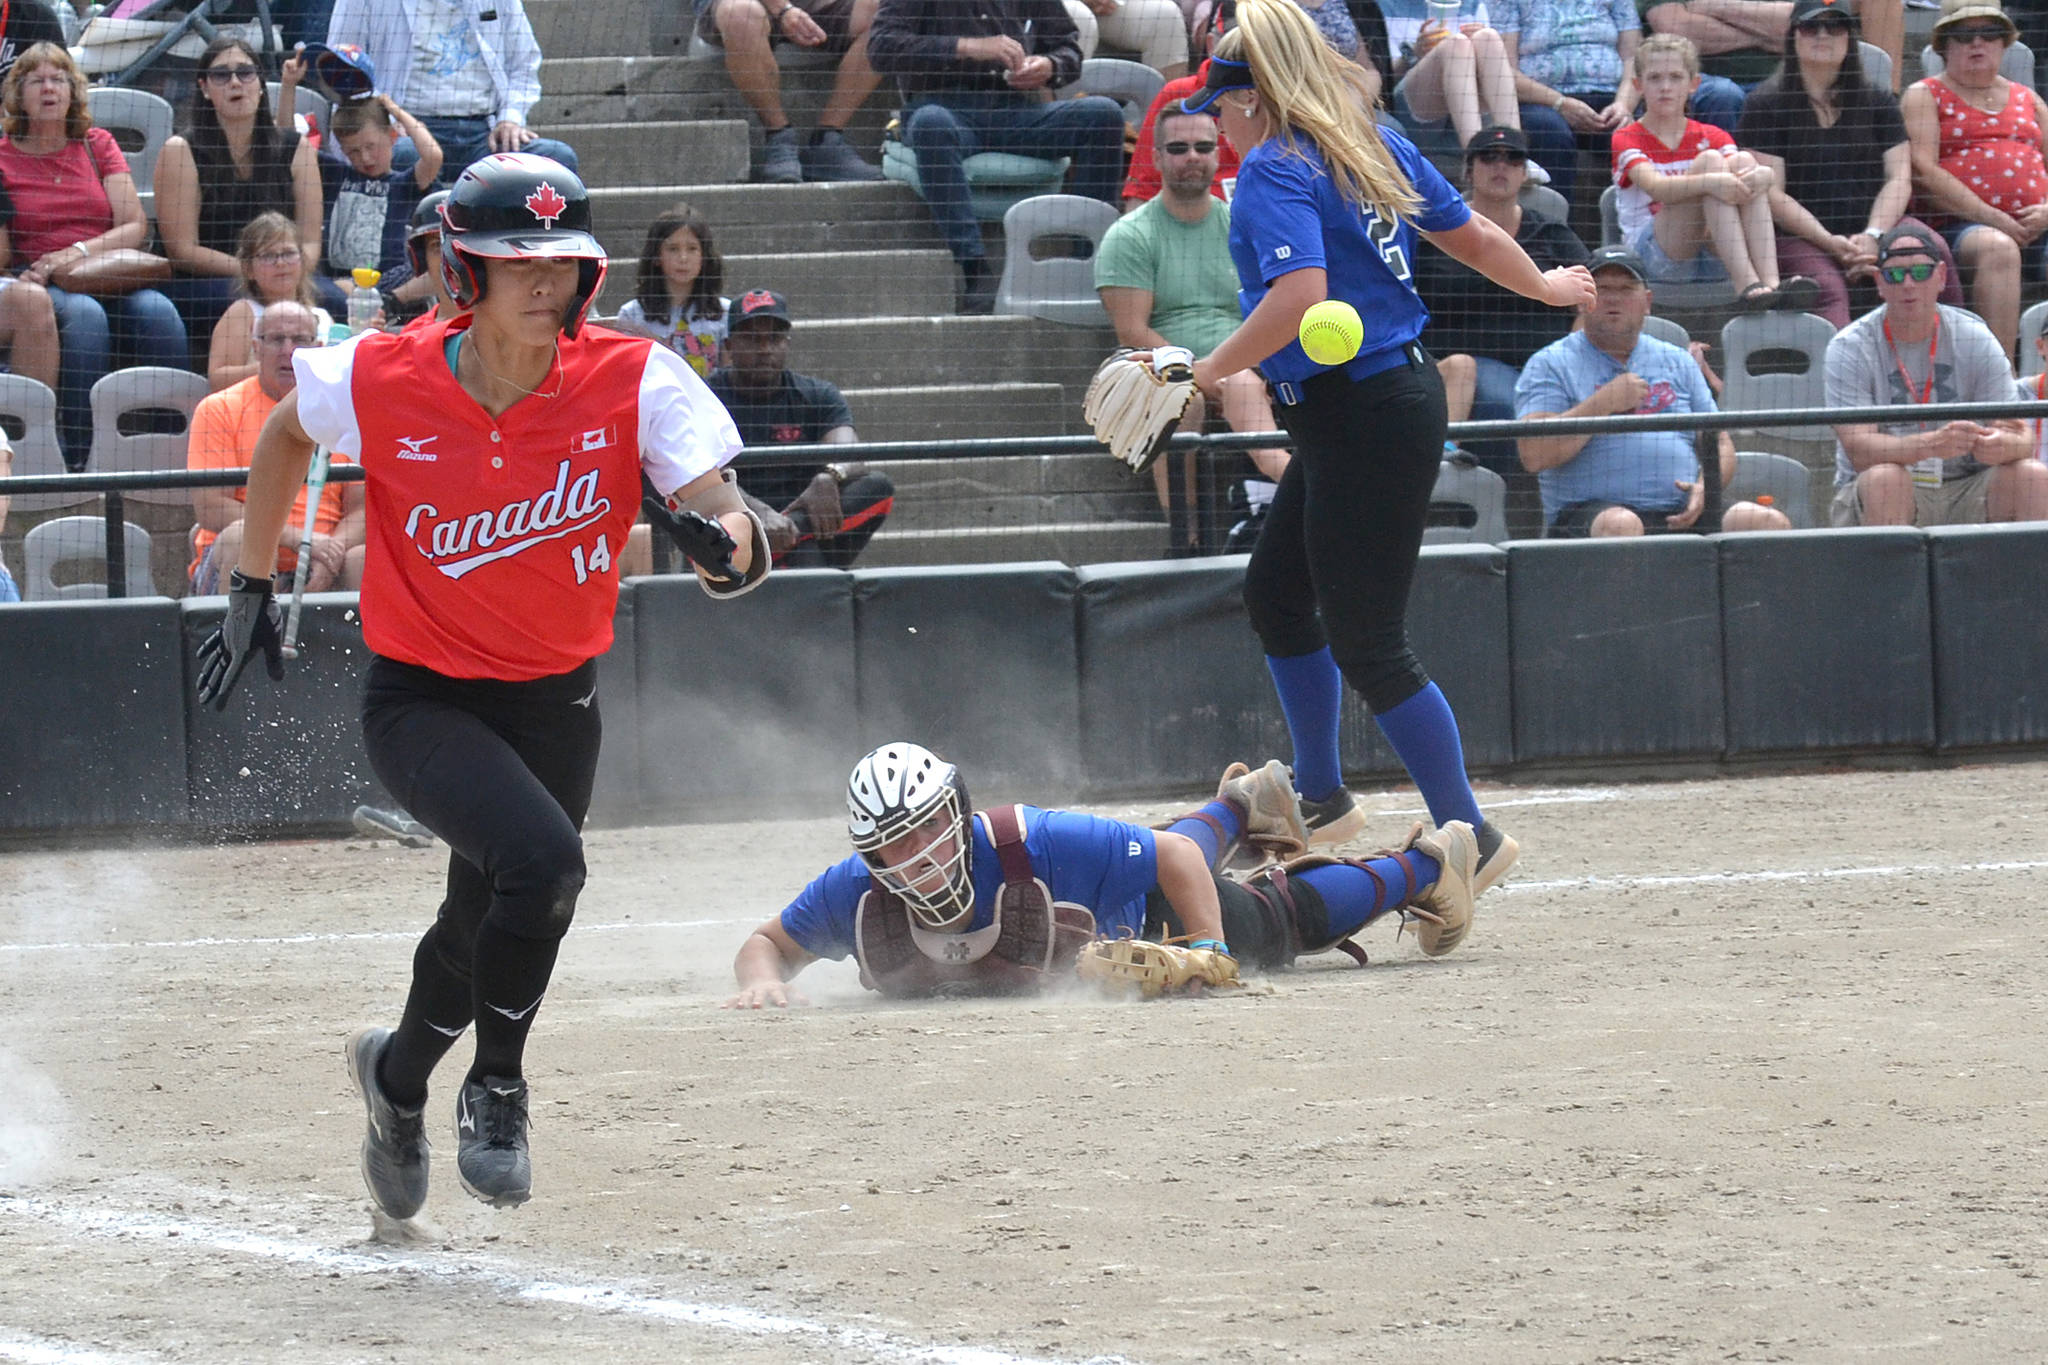 Triple Crown Colorado catcher Mia Davidson loses her balance and falls after scooping up a ball and quickly throwing to first base, as Team Canada shortstop Janet Leung tries to outrun the throw during a Canada Cup round-robin game Friday afternoon. (Nick Greenizan photo)